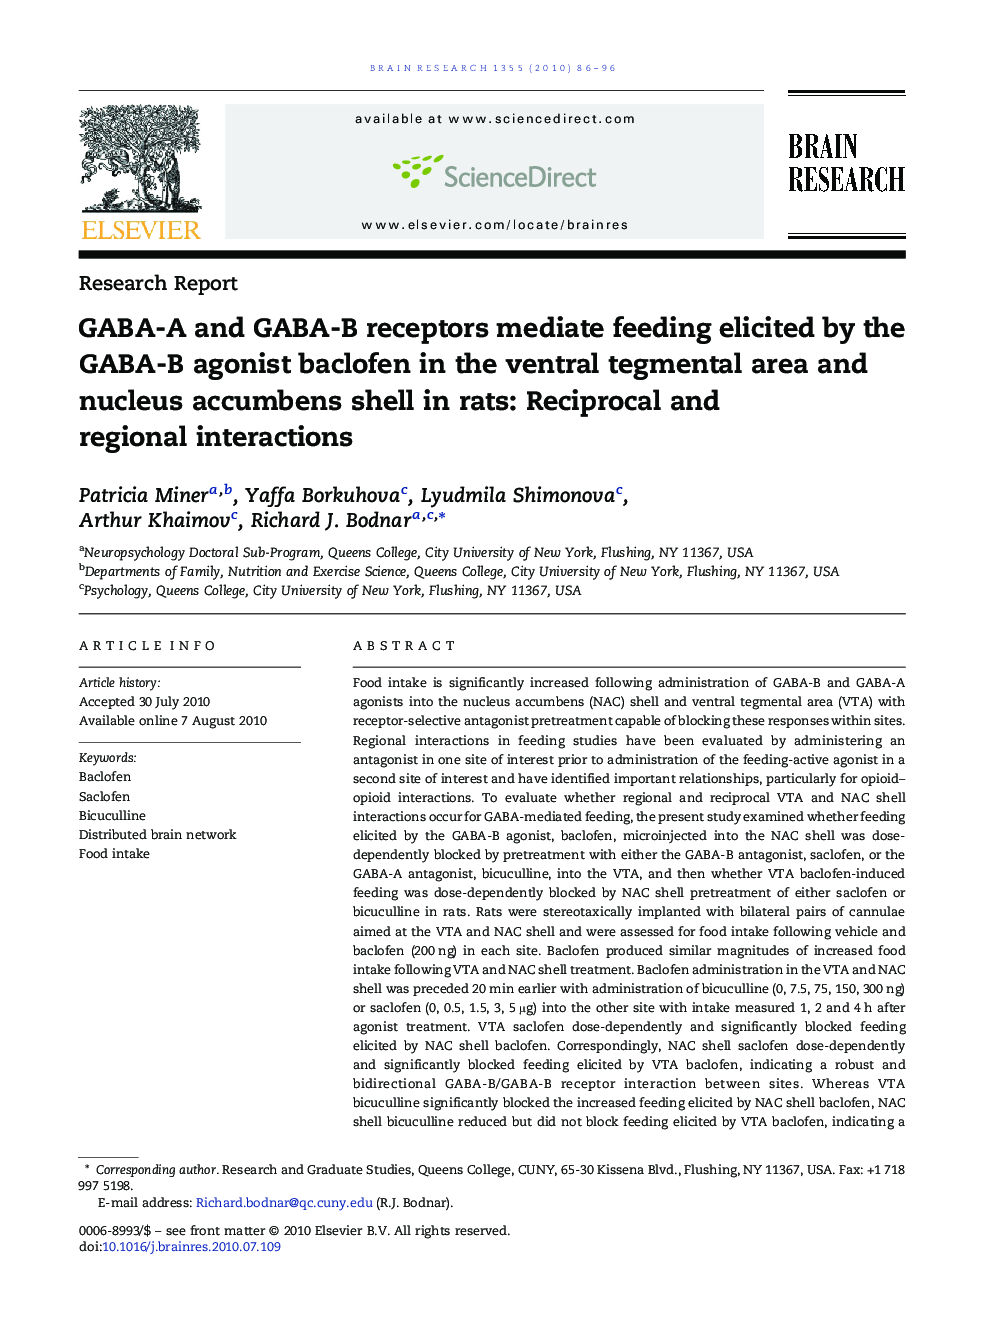 GABA-A and GABA-B receptors mediate feeding elicited by the GABA-B agonist baclofen in the ventral tegmental area and nucleus accumbens shell in rats: Reciprocal and regional interactions